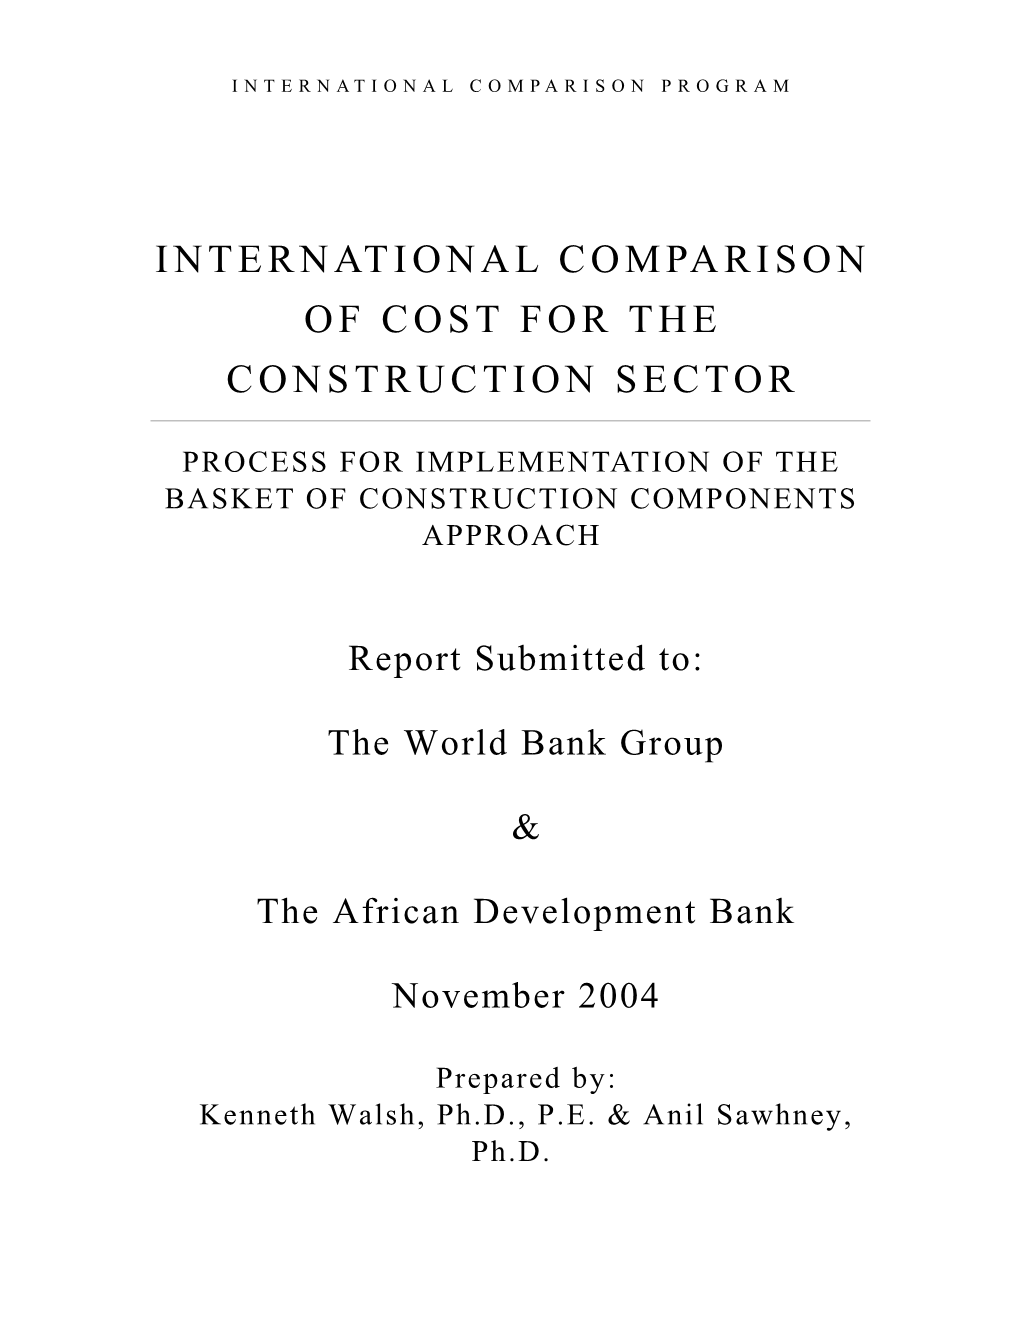 International Comparison of Cost for the Construction Sector